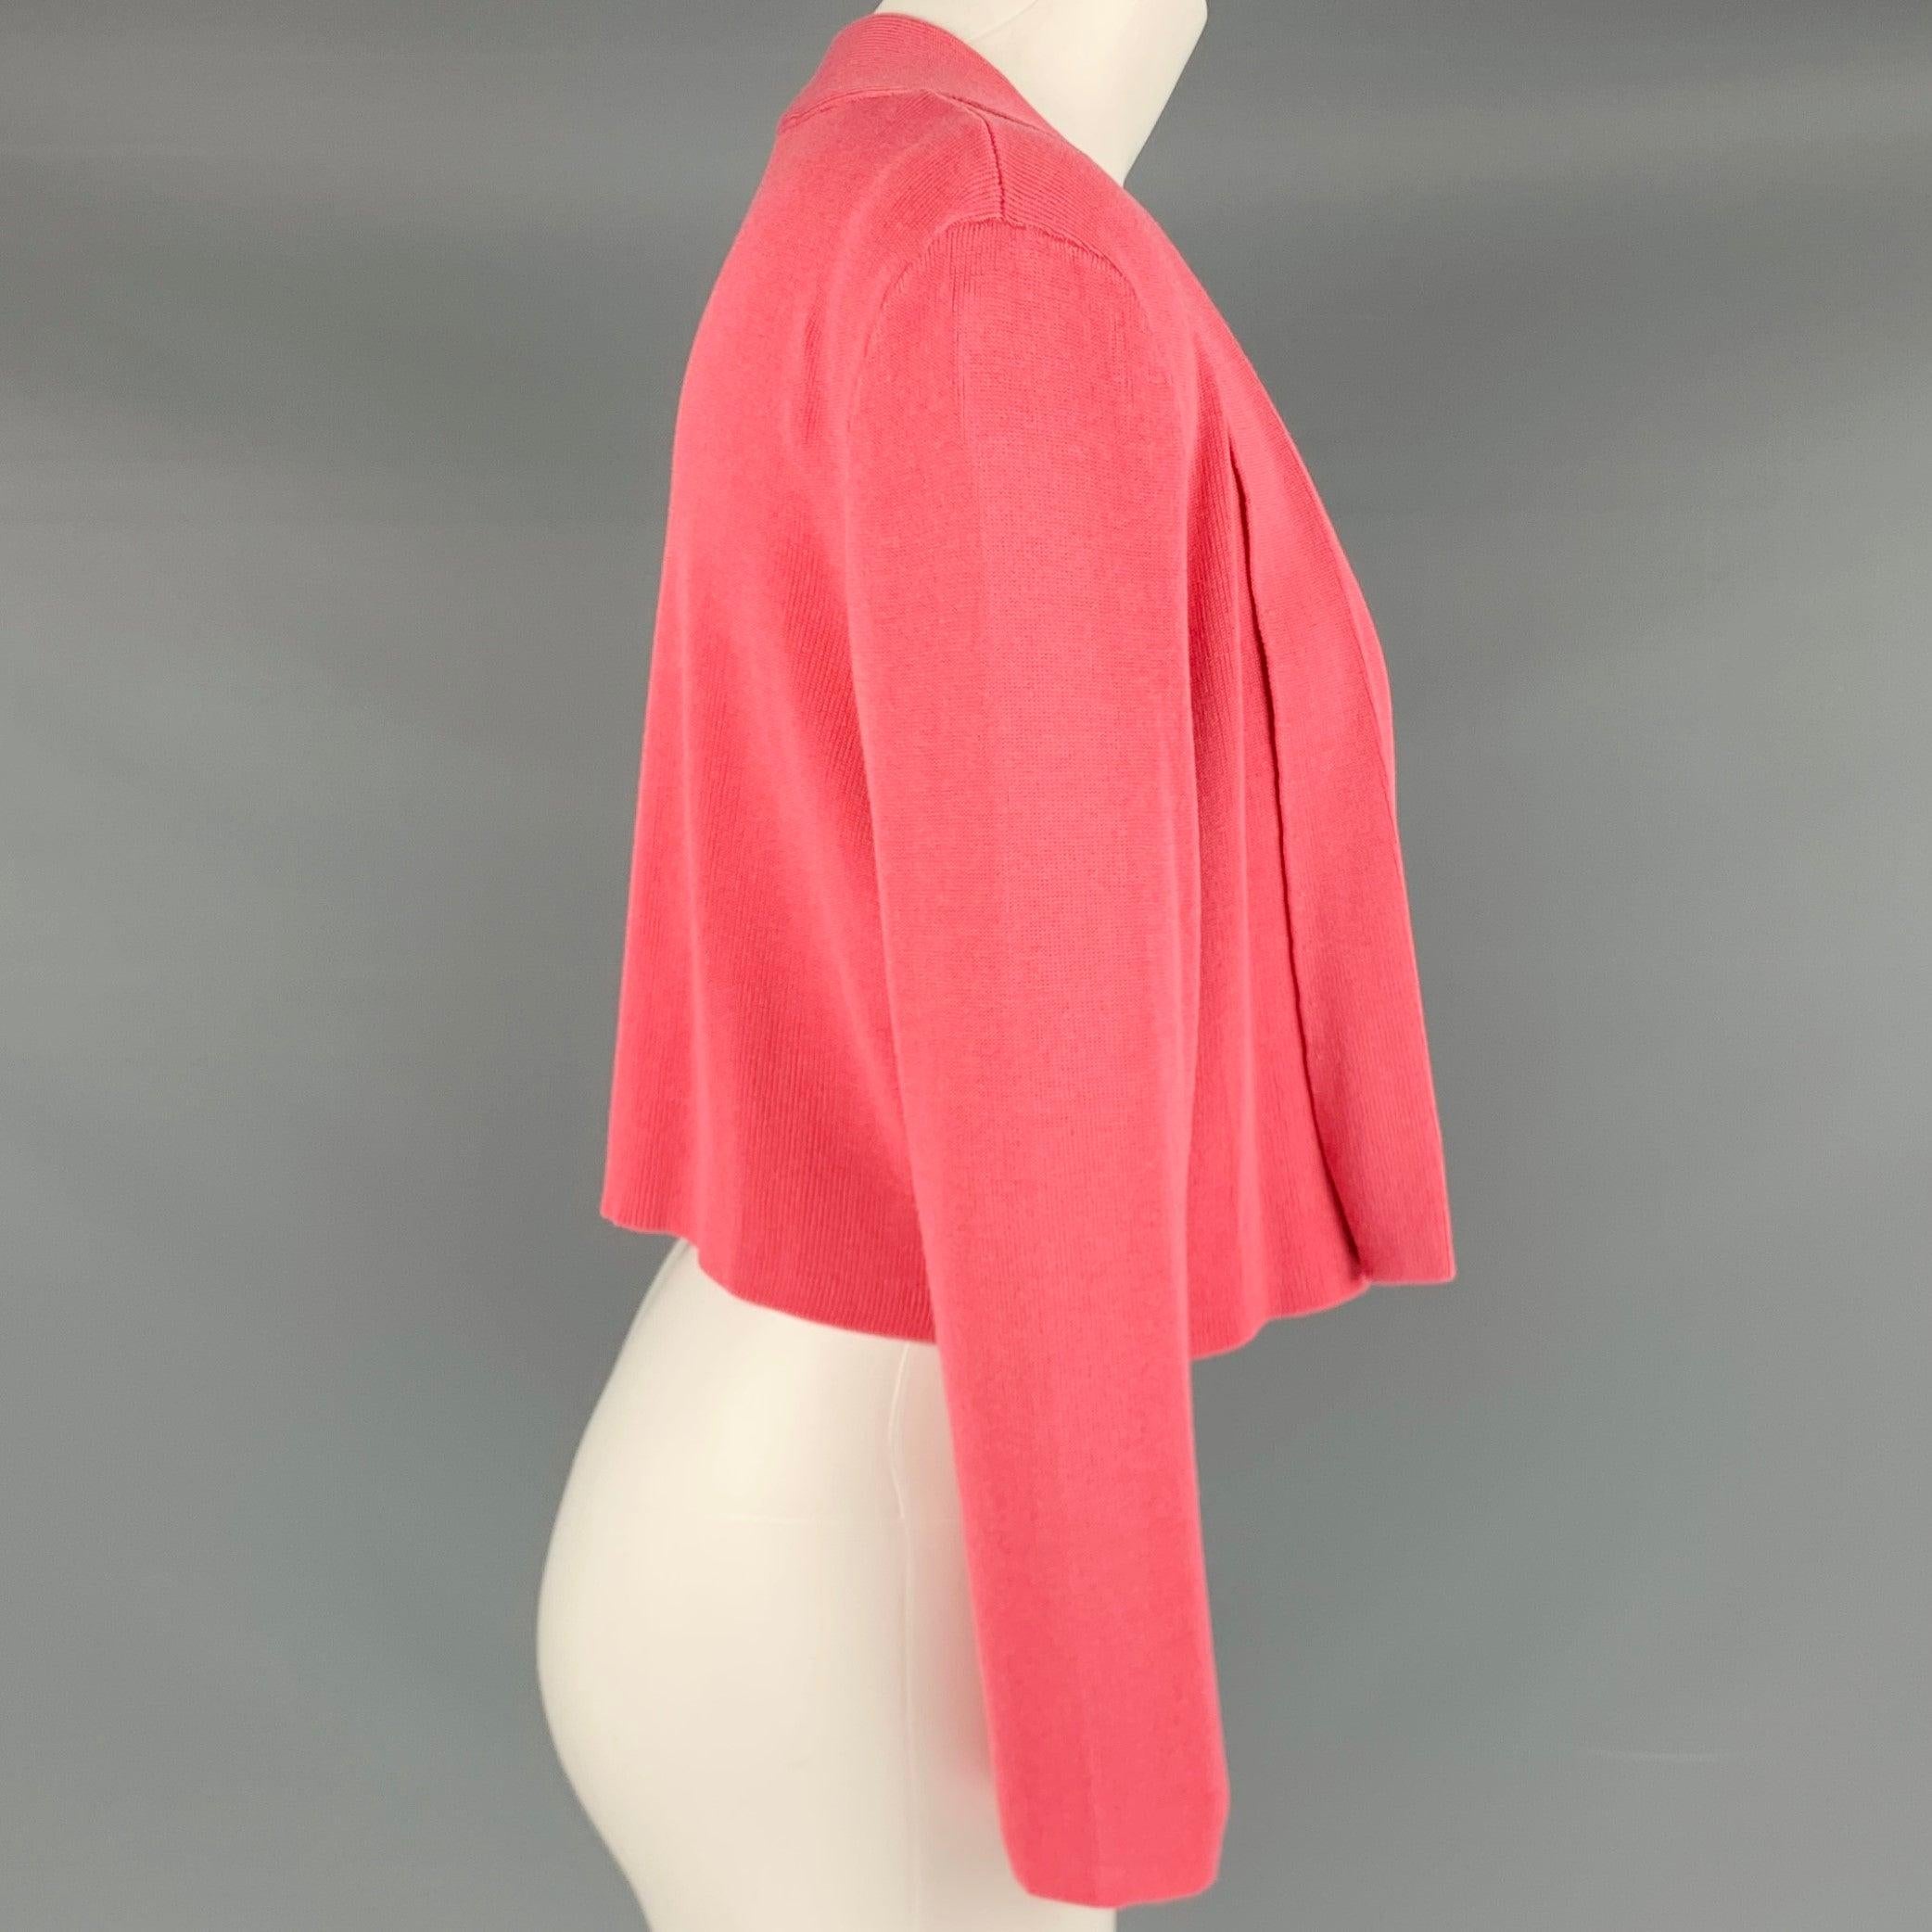 BOSS by HUGO BOSS cardigan
in a stretchy pink viscose cotton blend knit featuring an open front style and cropped length.Excellent Pre-Owned Condition. 

Marked:   S 

Measurements: 
 
Shoulder: 17.5 inches Bust: 37 inches Sleeve: 18 inches Length: